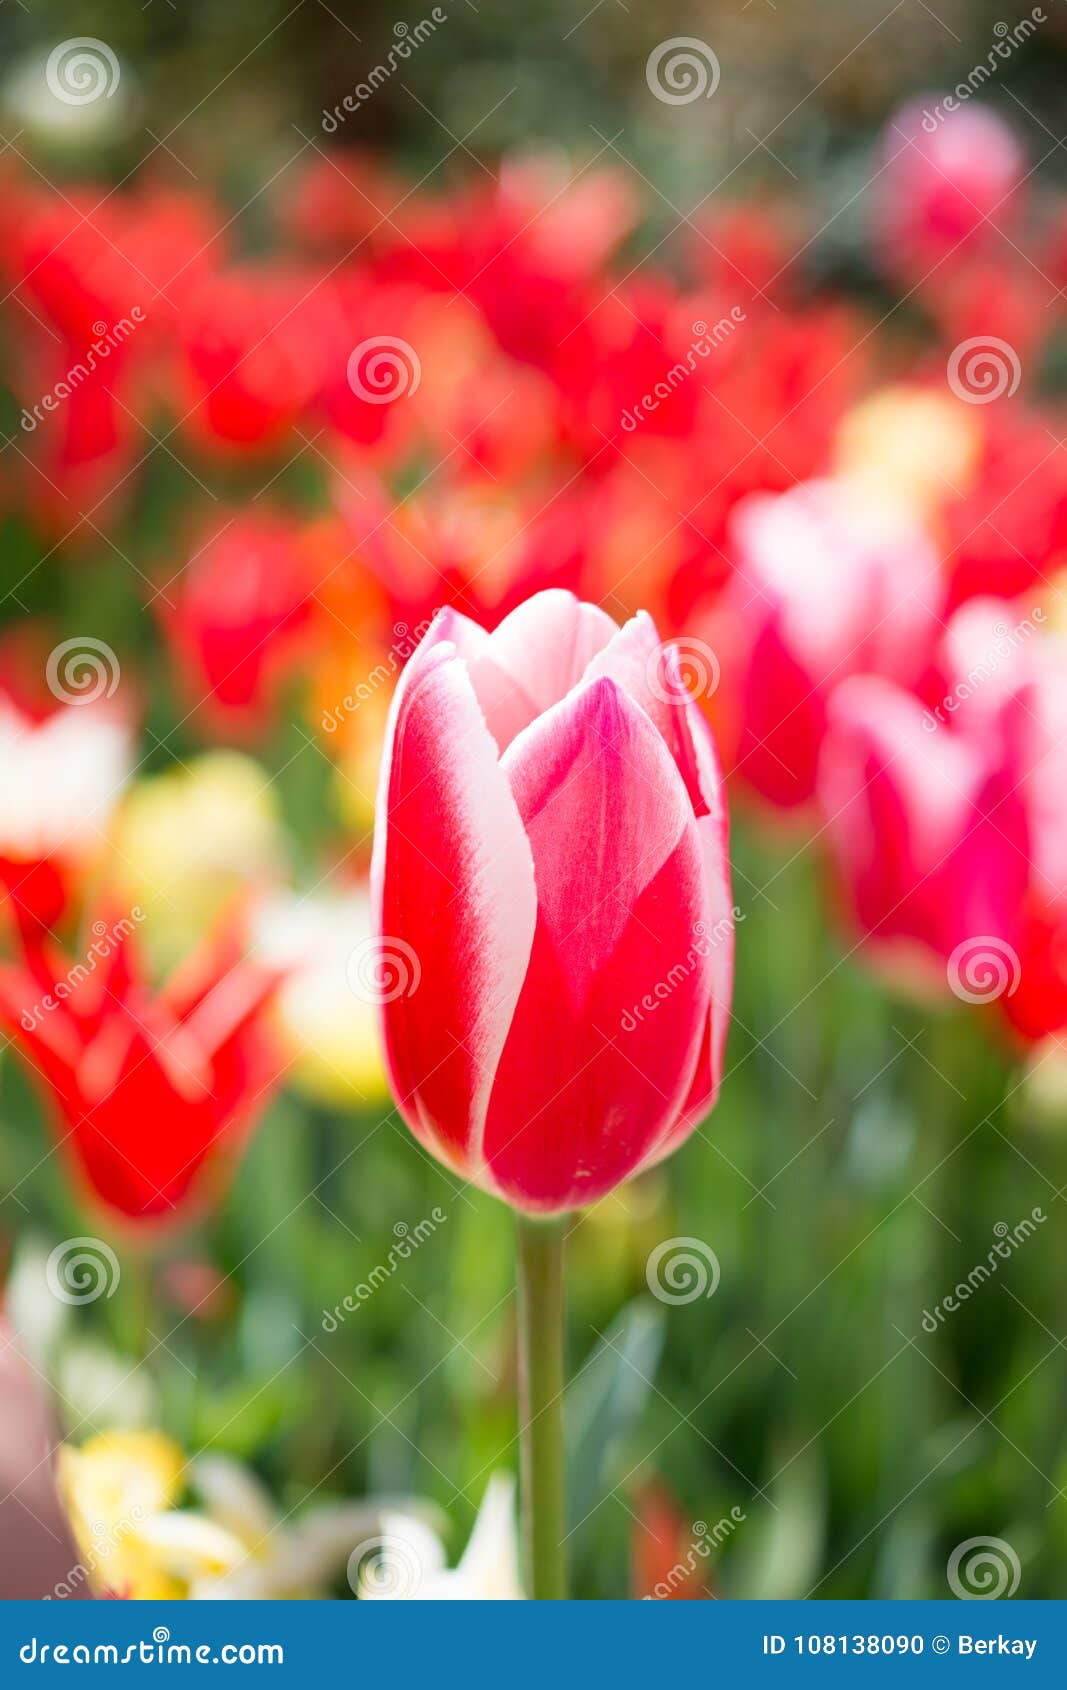 Various Color Tulip Flowers in the Garden Stock Photo - Image of ...